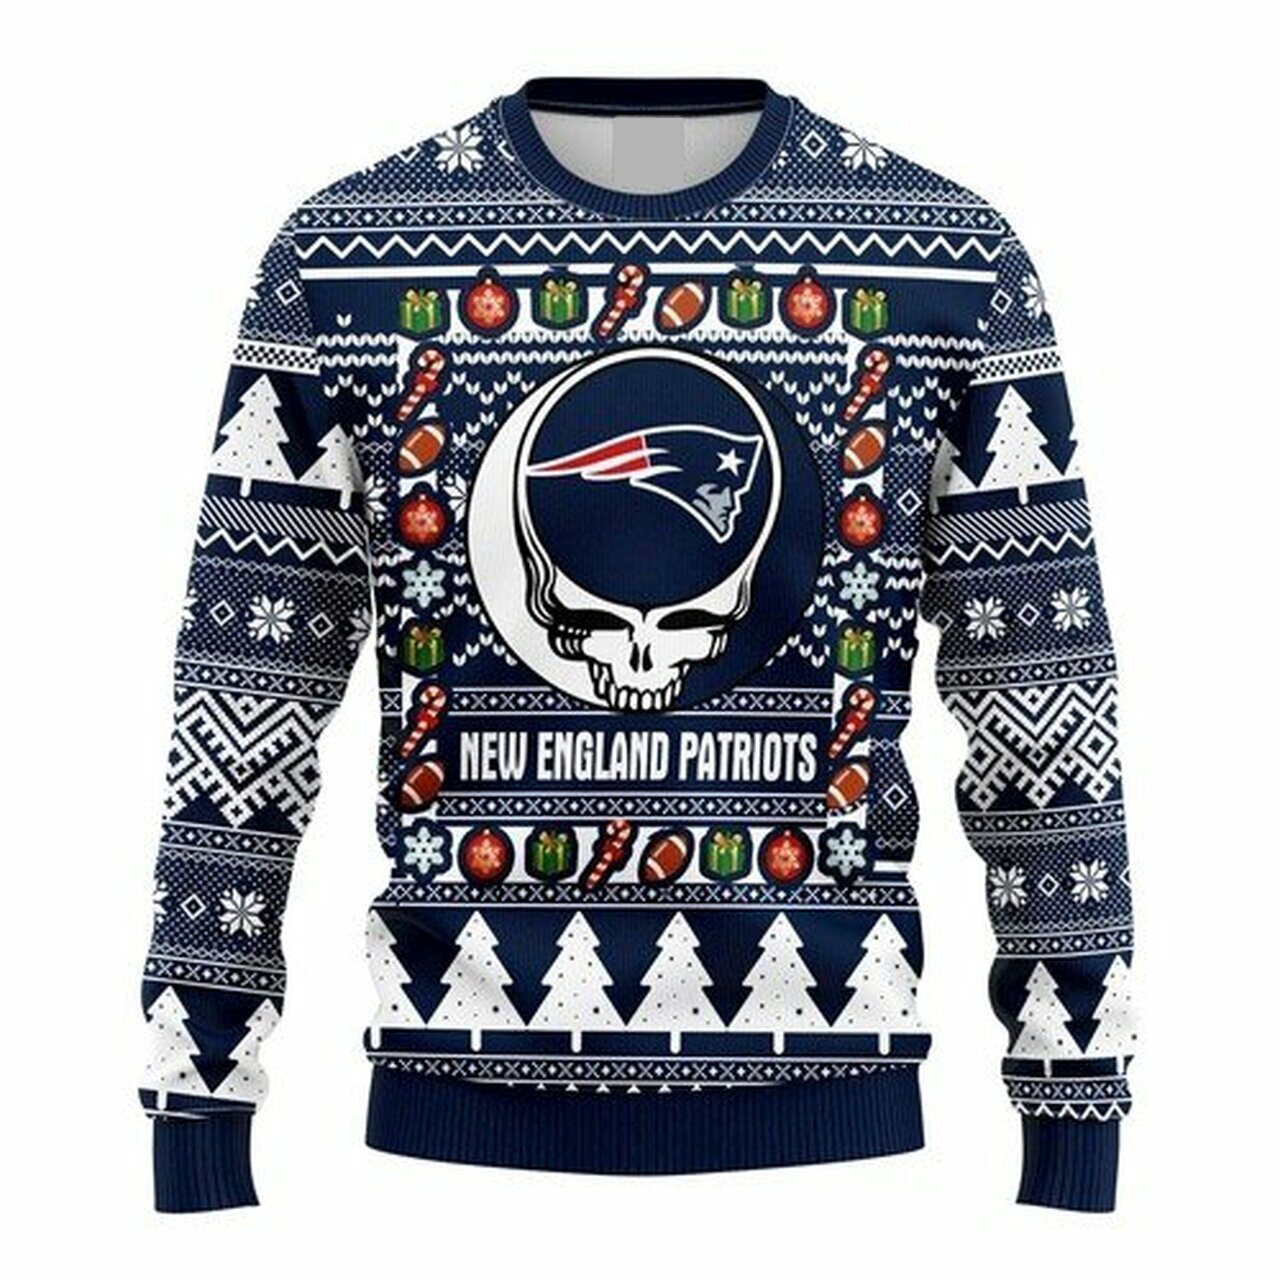 NFL New England Patriots Grateful Dead ugly christmas sweater